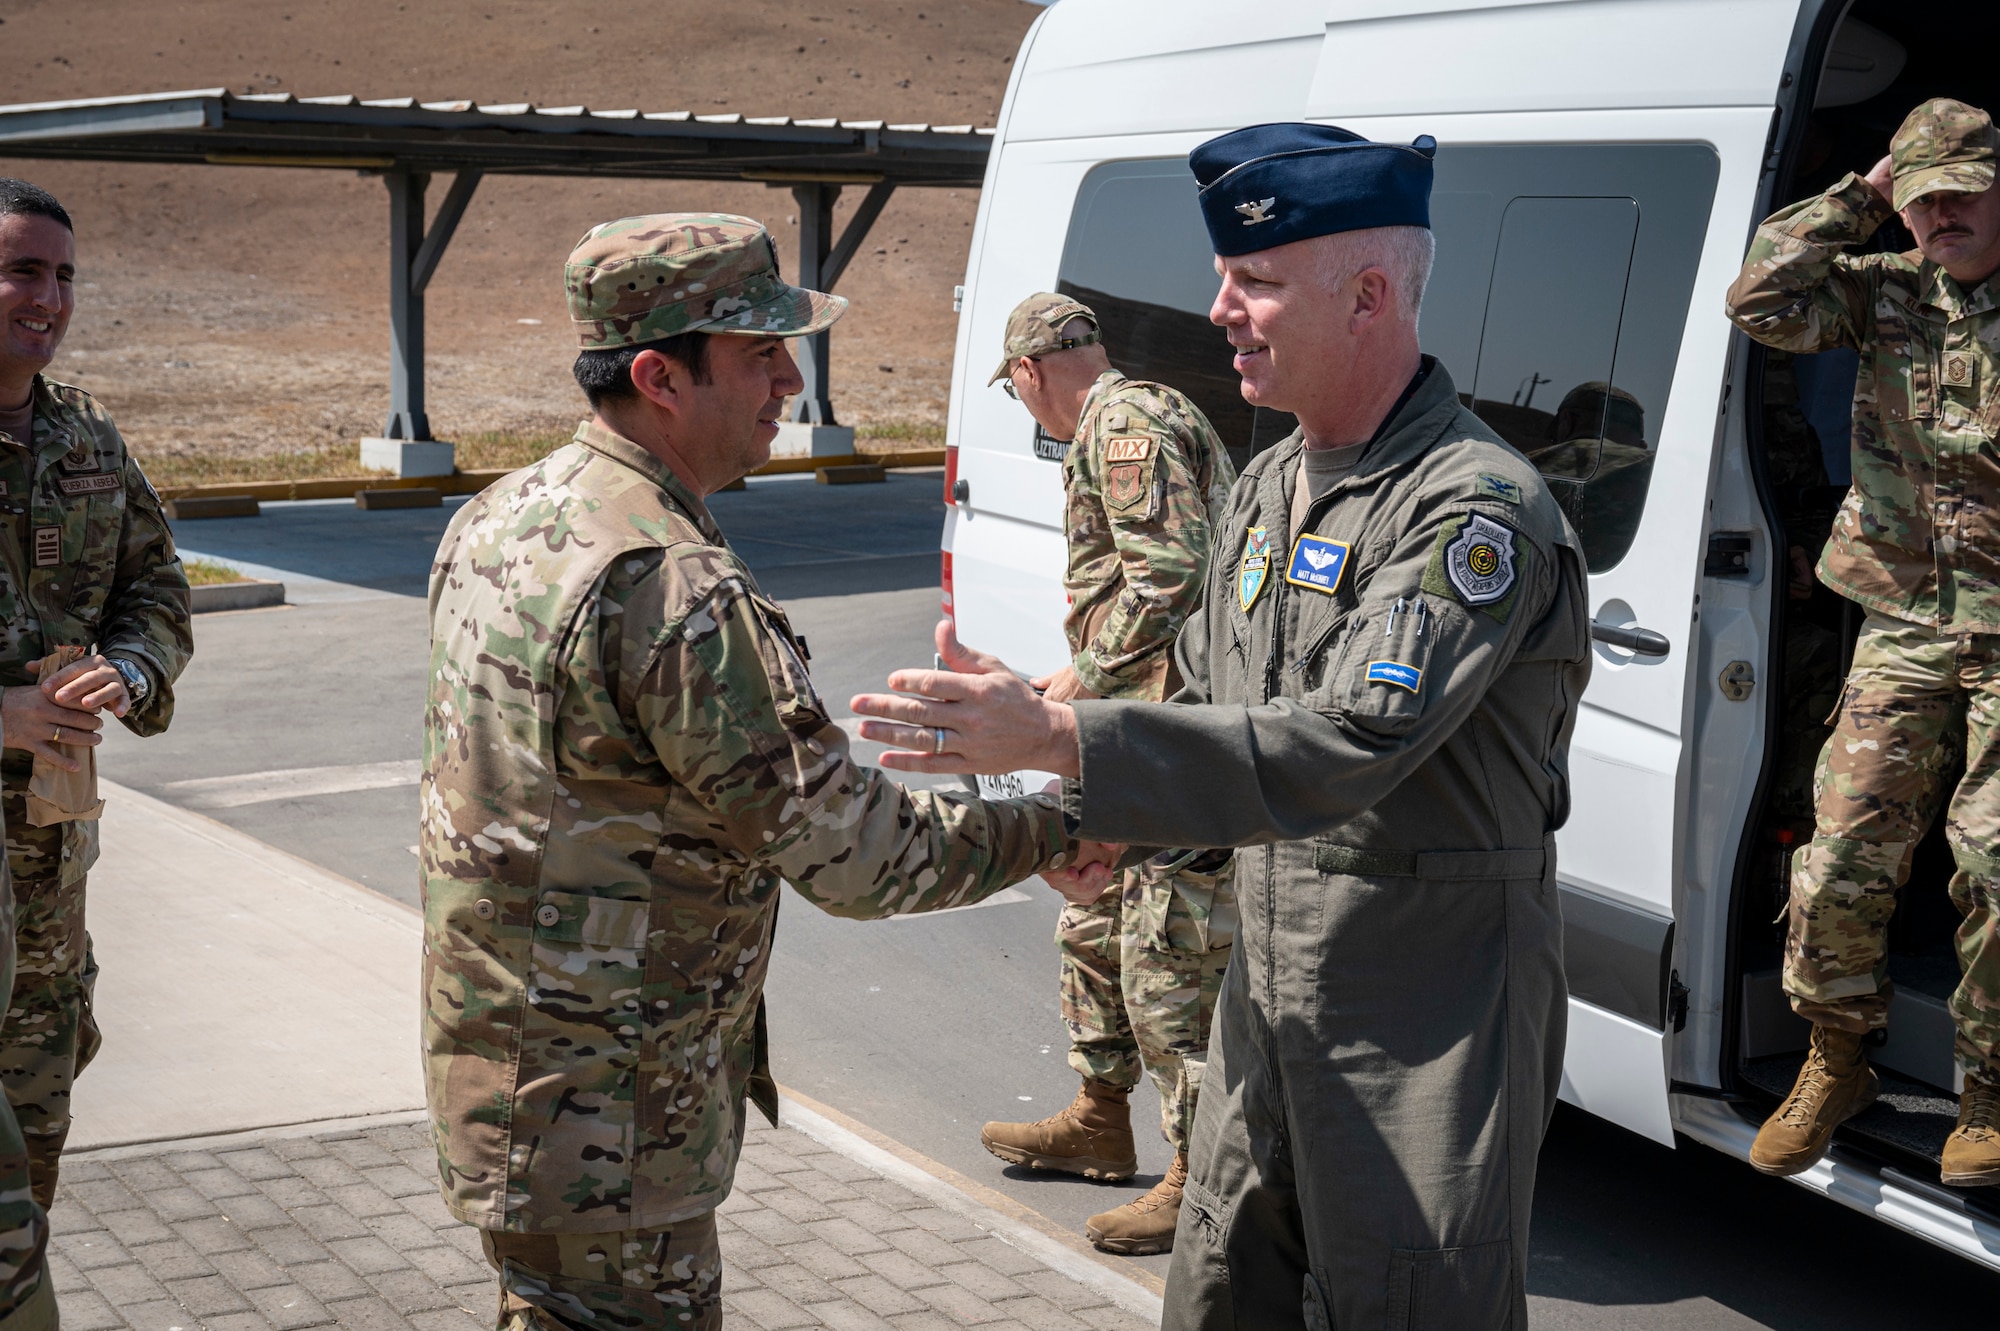 U.S. Air Force Col. Matt McKinney (right), Resolute Sentinel 23 Combined Joint Task Force Commander, and Fuerza Aérea del Perú Lt. Col. Javier Ildefonso, RS23 Space Operations Center Commander, shake hands during a tour at the Centro Nacional de Operaciones de Imágenes Satelitales, Lima, Peru, July 4, 2023, as part of Resolute Sentinel 23. The space exercise, led by U.S. Southern Command in partnership with U.S. Space Command’s Joint Task Force Space Defense Commercial Operations (JCO) Cell, the Peruvian Aerospace Research and Development Center (CONIDA), and the Peruvian Air Force, aims to bolster the region's emerging space programs.  (U.S. Air Force photo by Staff Sgt. Matthew Matlock)